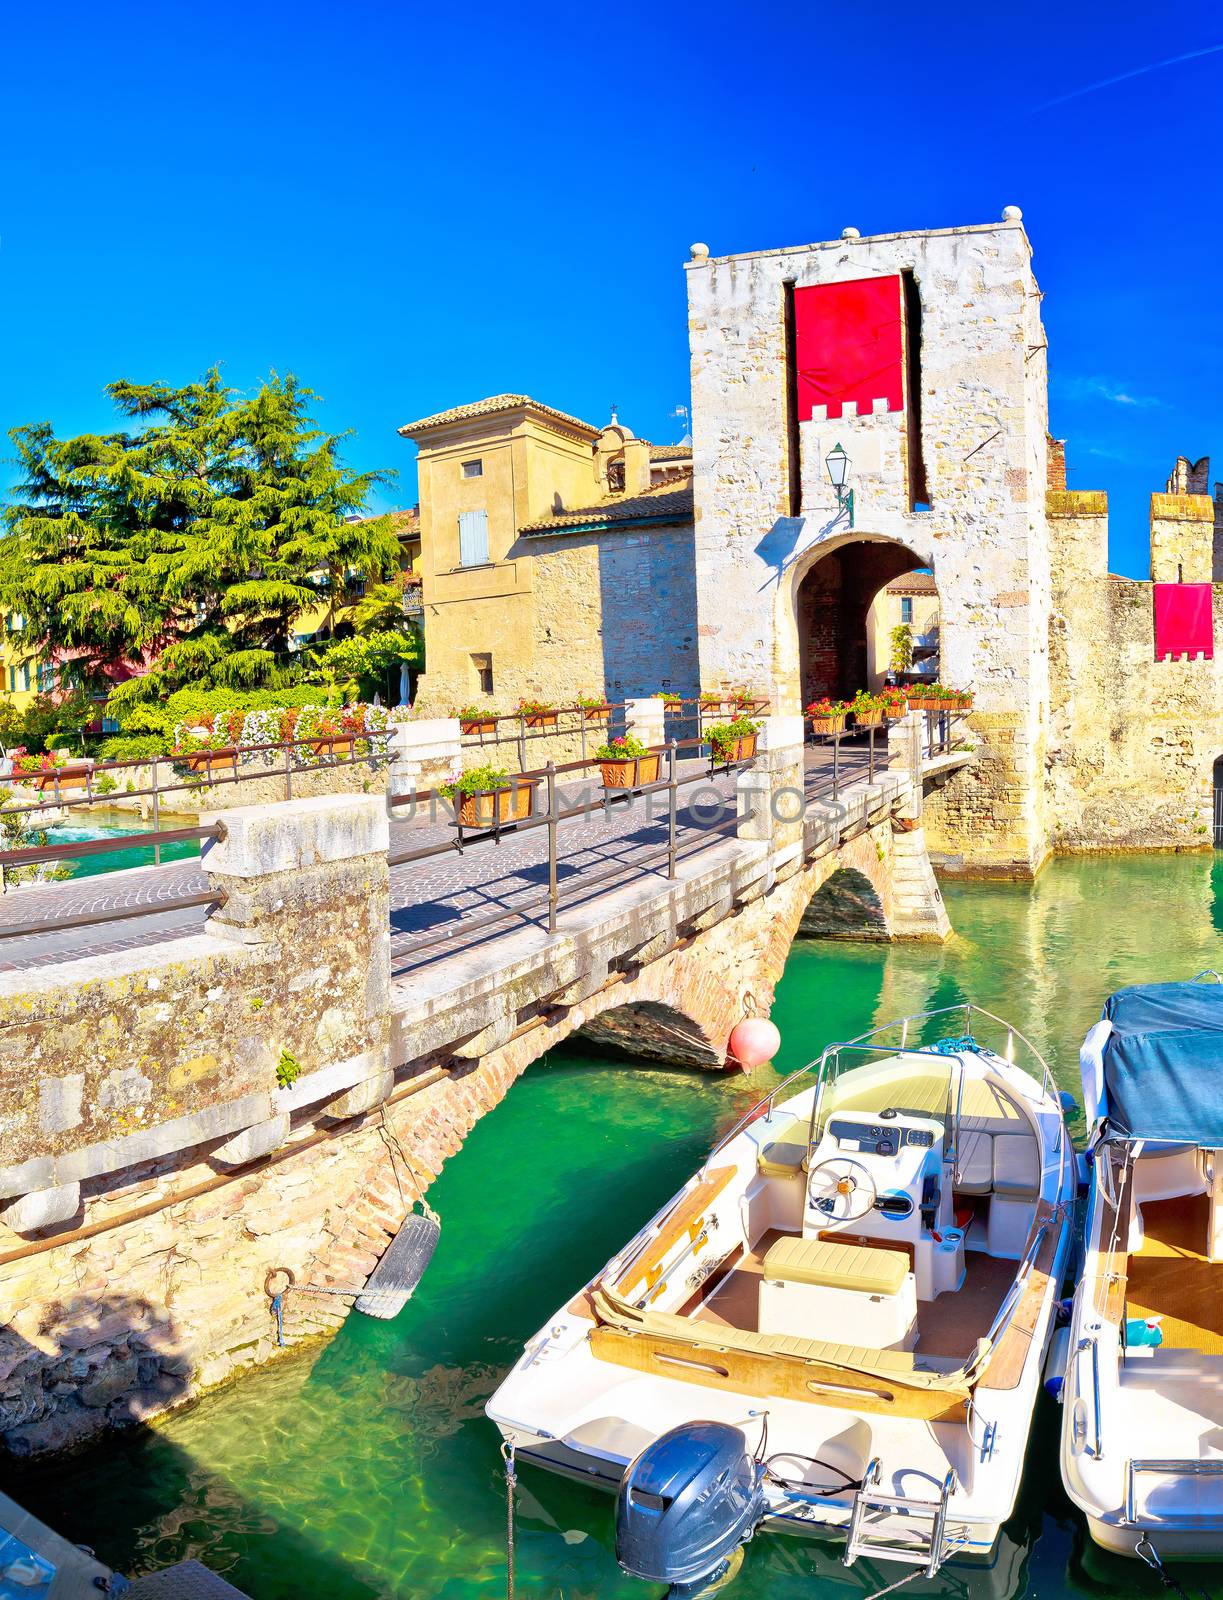 Town of Sirmione entrance walls view, Lago di Garda, Lombardy region of Italy